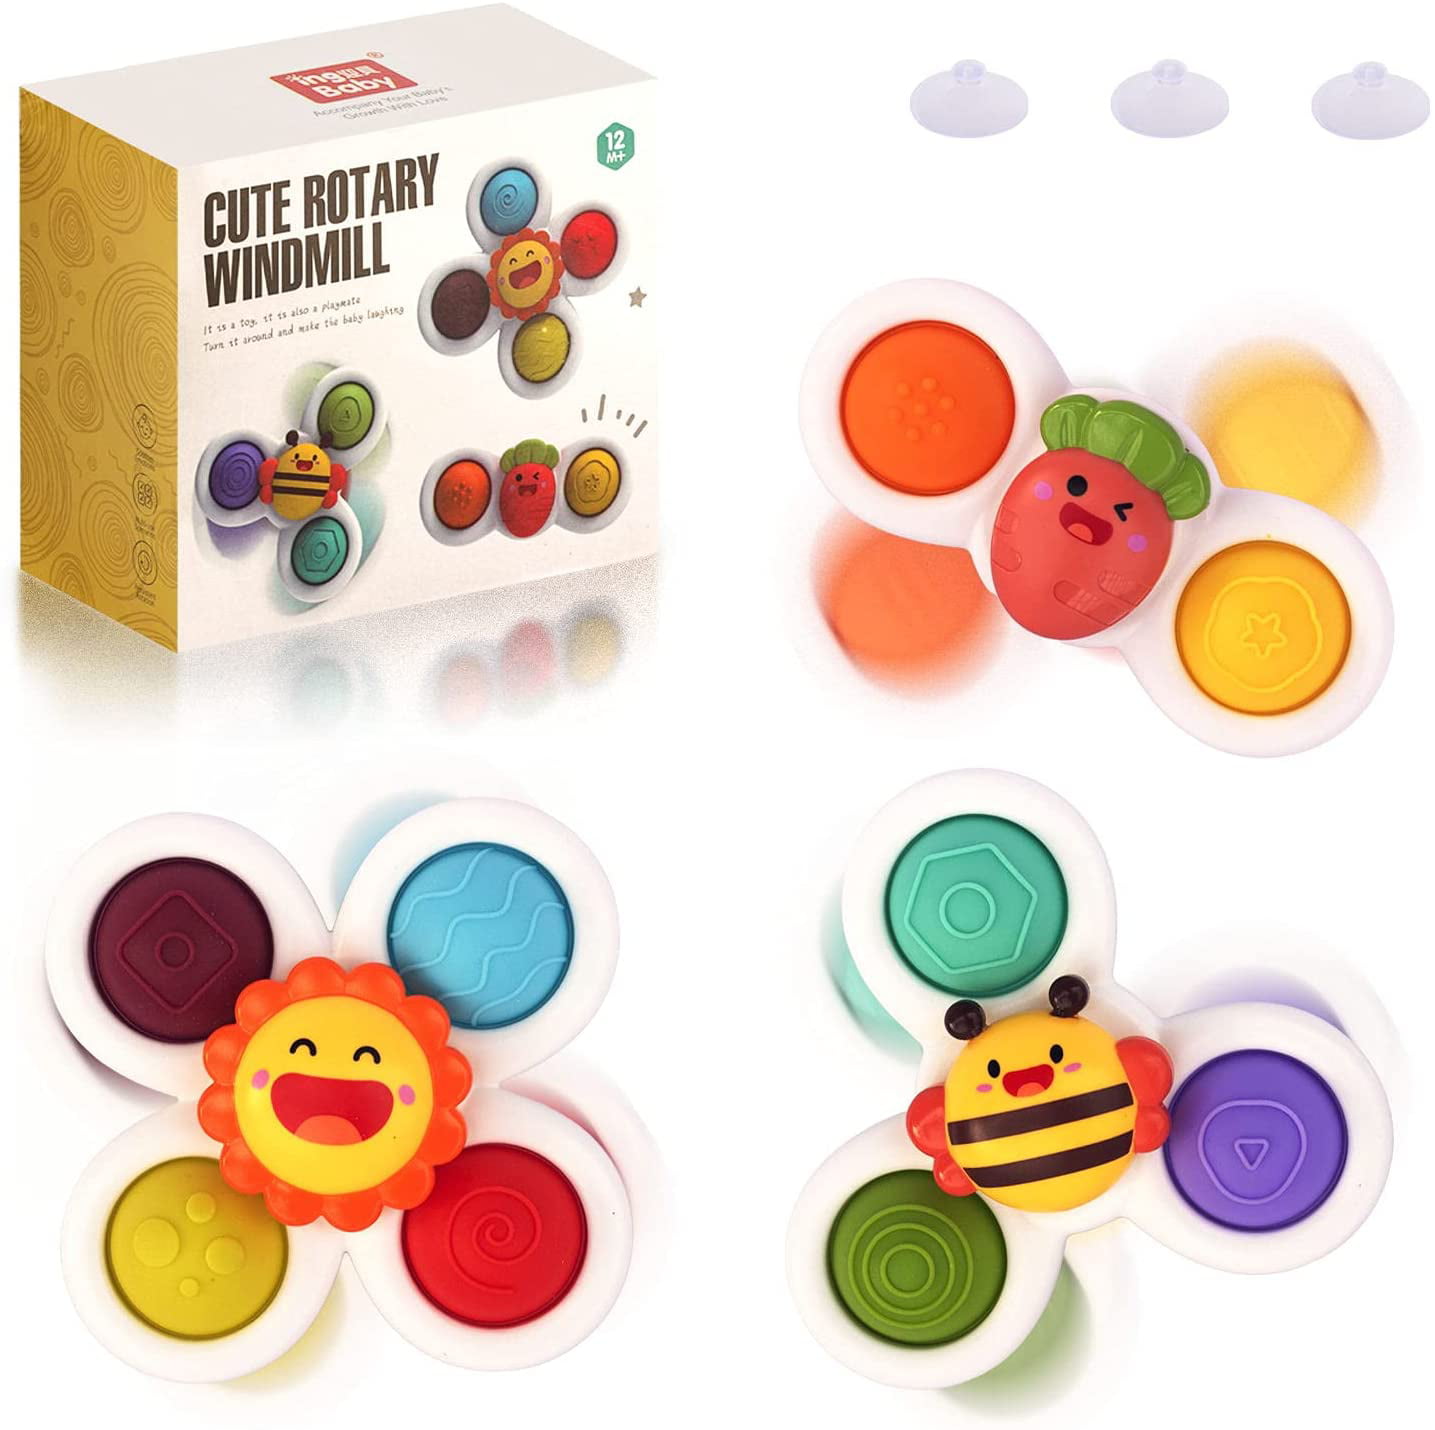 Simple Dimple Fidget Toys with Suction Cup Silicone Flipping Board Release Stress and Anxiety Kids Sensory Spinning Toys Gifts 3Pcs Pop Suction Cup Fidget Spinner Popper Toy 